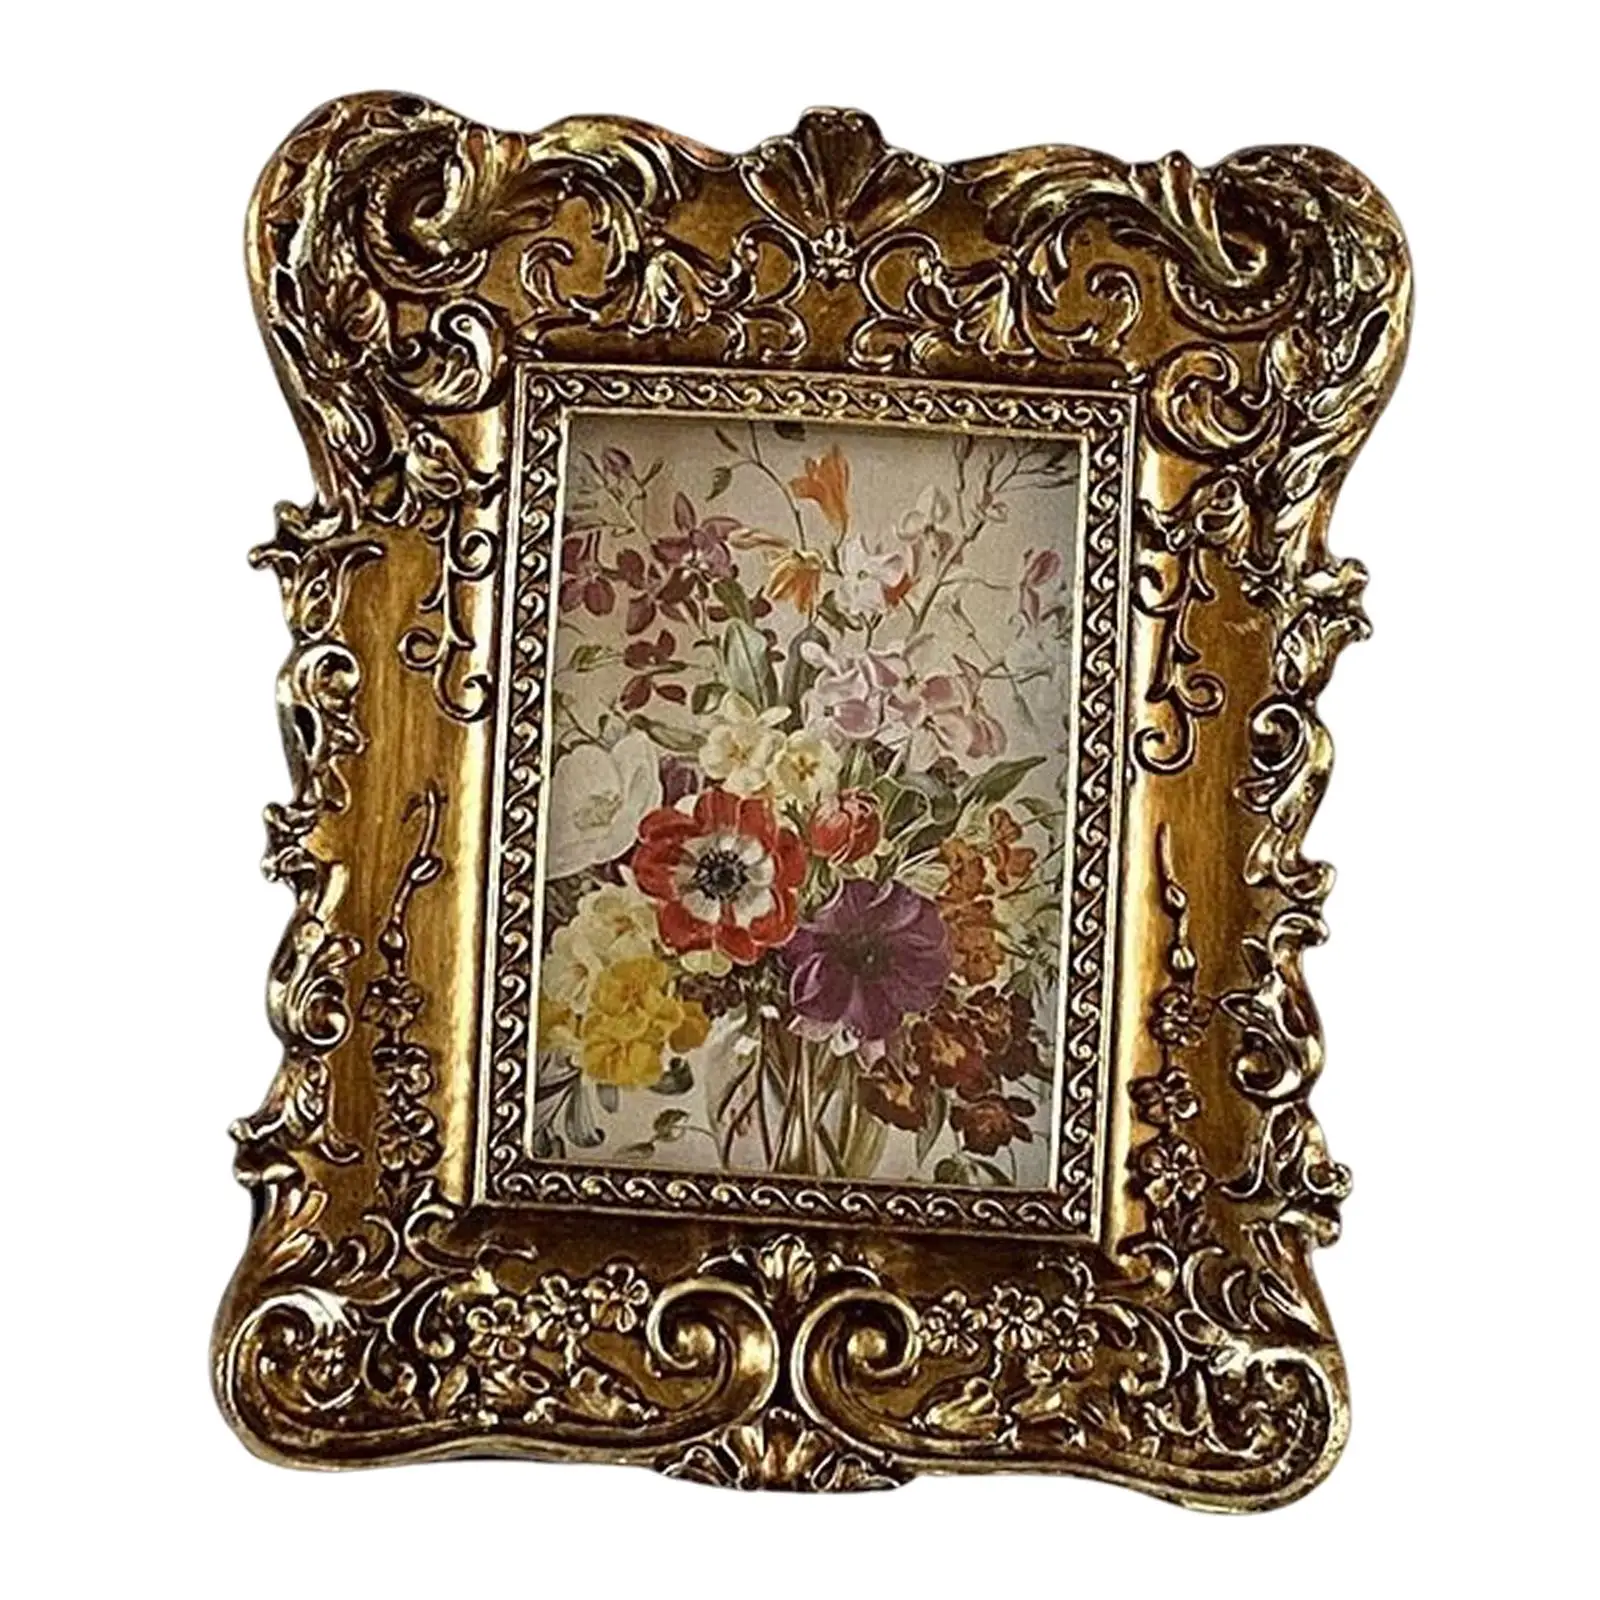 Vintage Style Photo Frame Photo Holder Desktop Wall Hanging Photo Gallery Resin Picture Frame for Holiday Office Home Decor